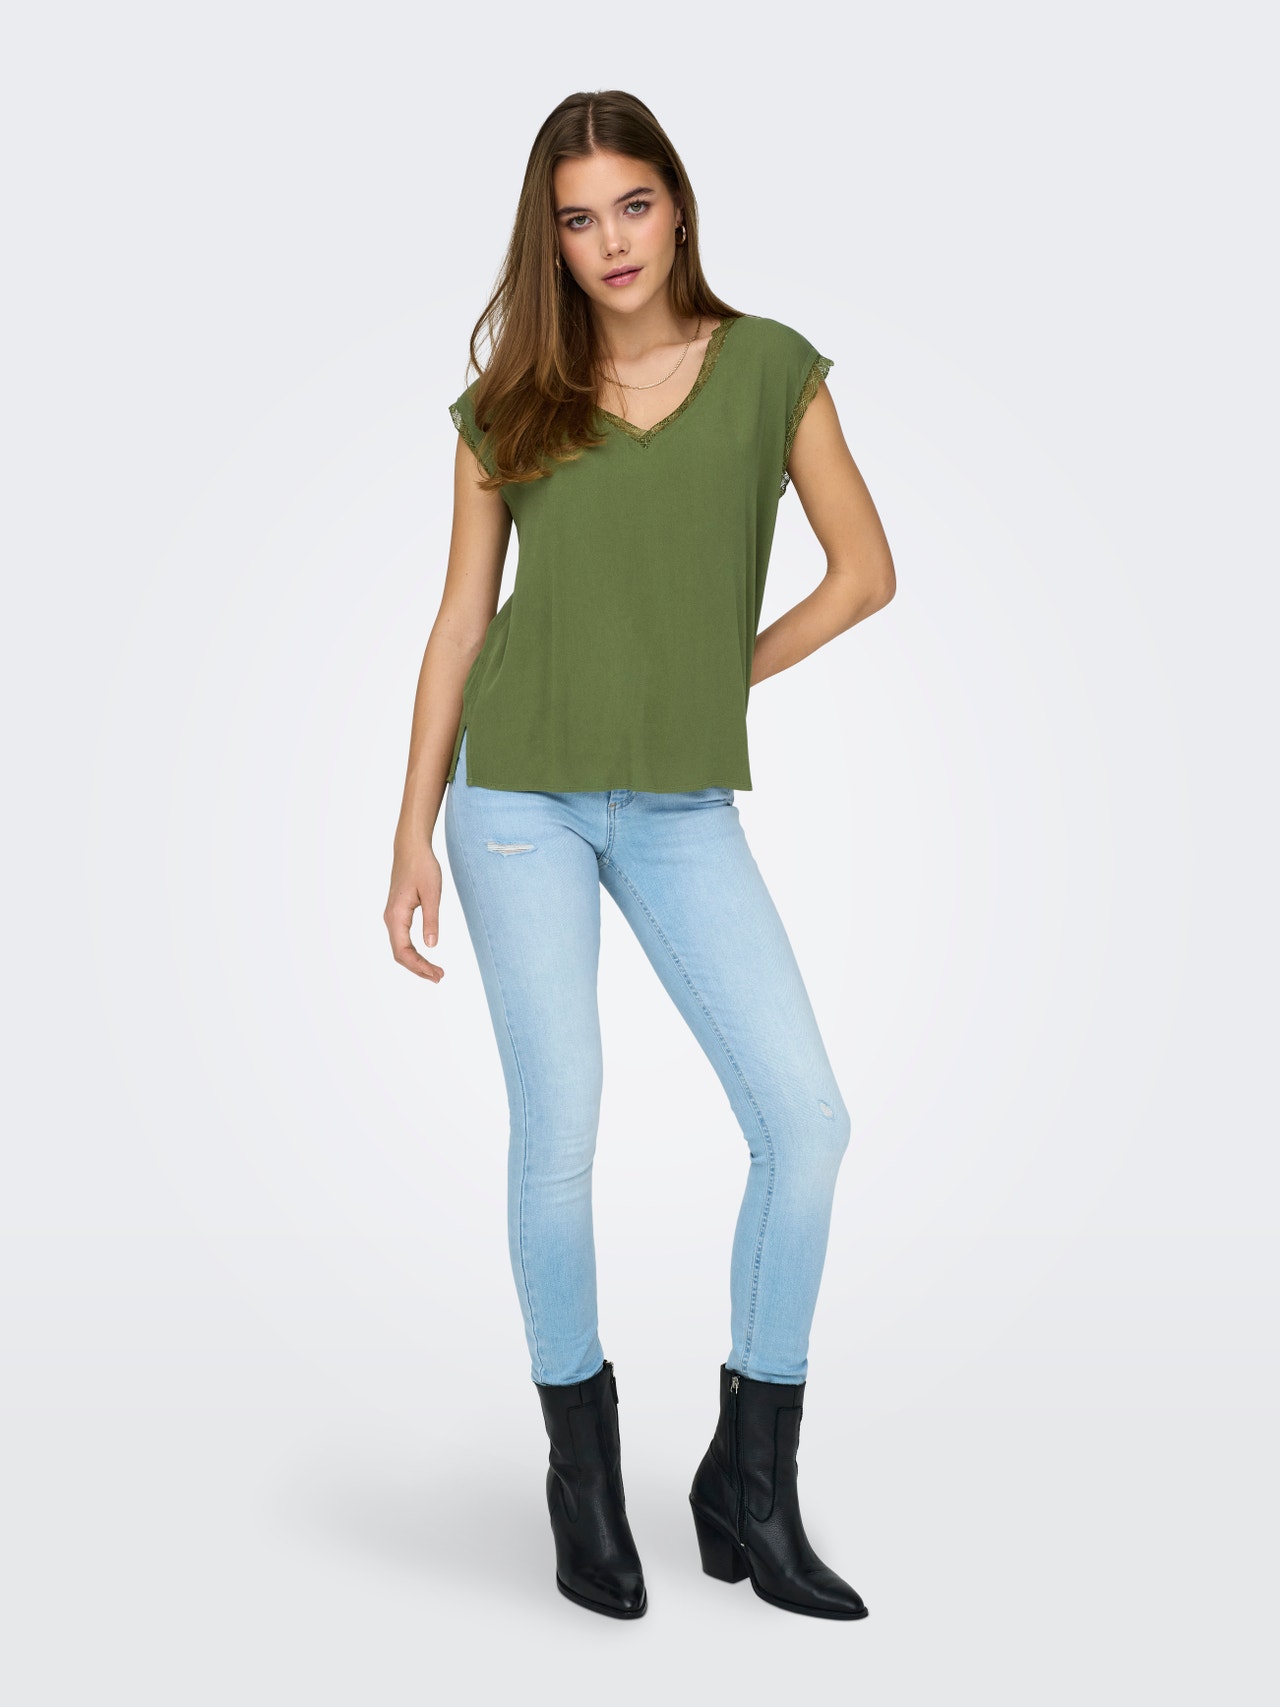 ONLY V-neck top with lace details -Olivine - 15252241